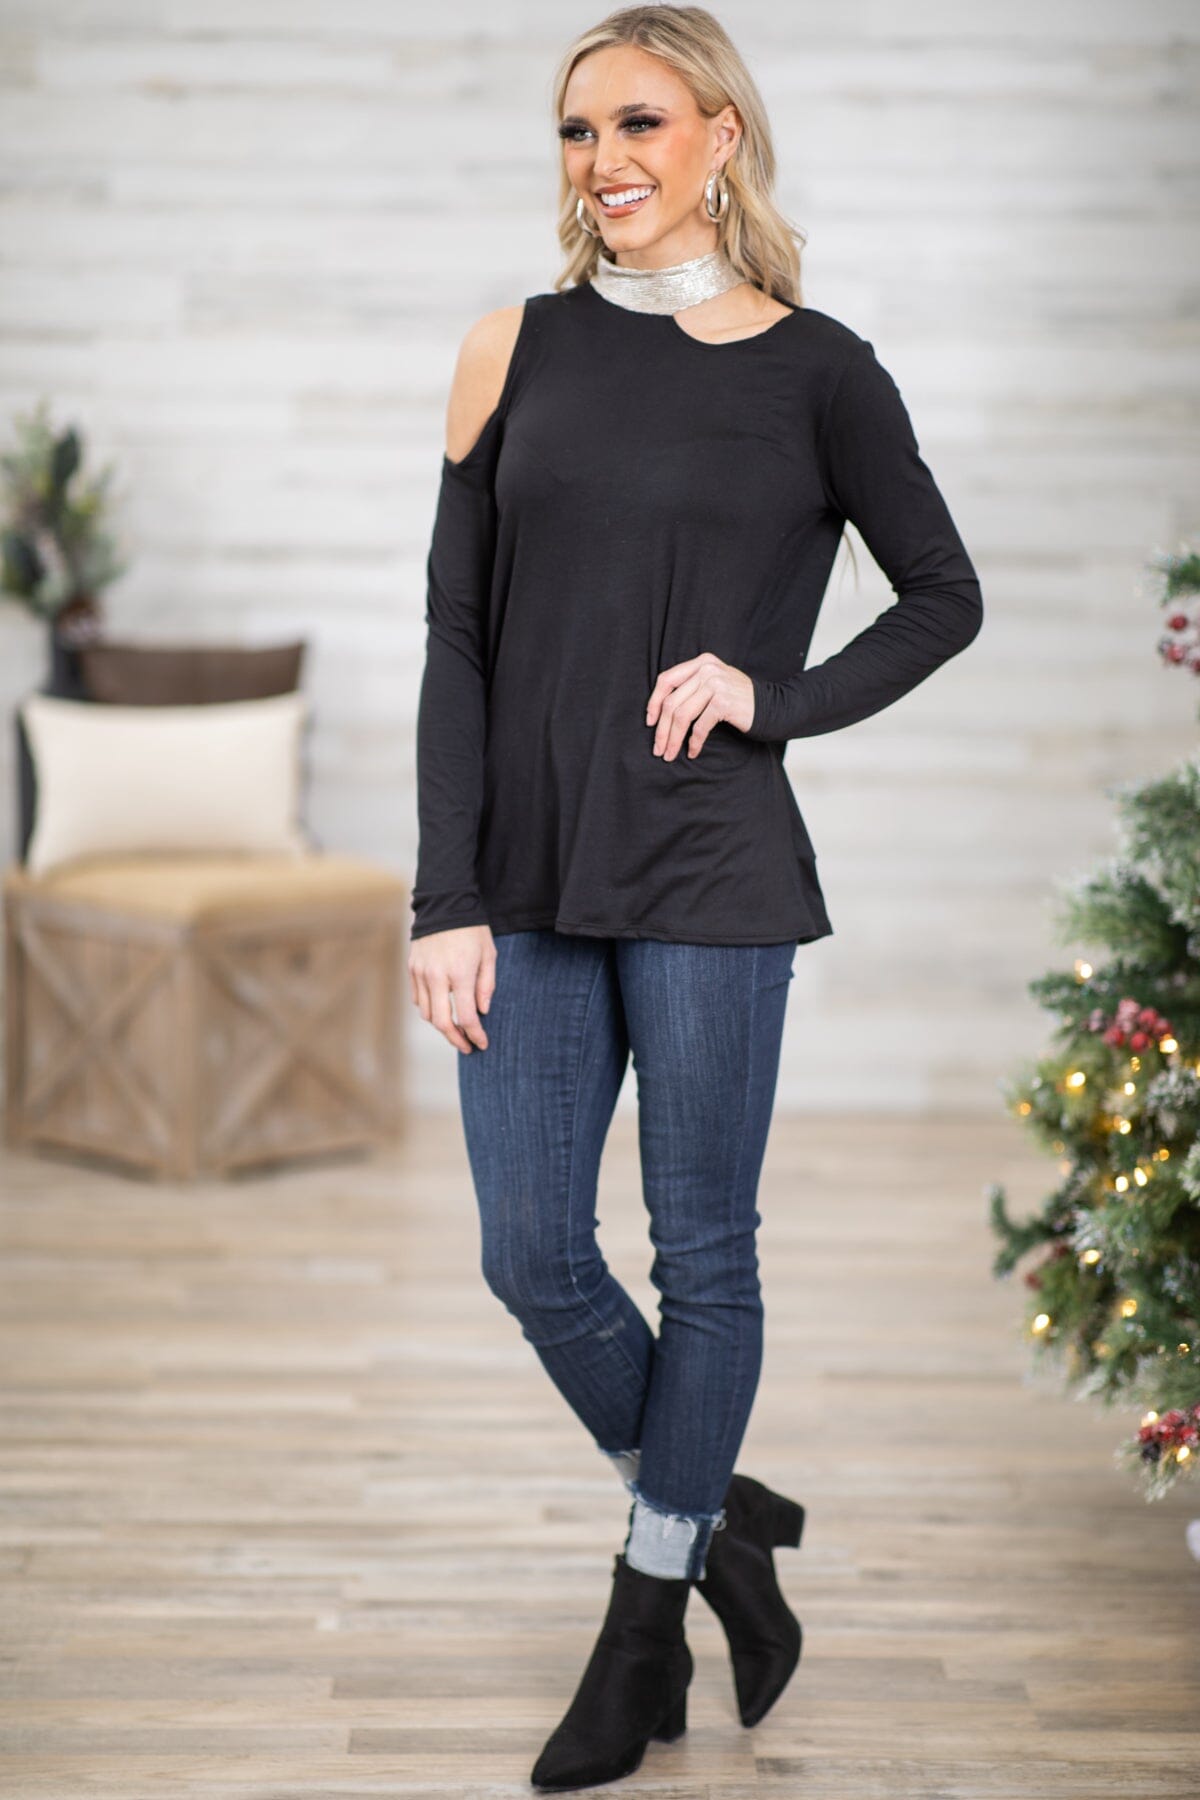 Black and Silver Mock Neck Top With Cutouts - Filly Flair